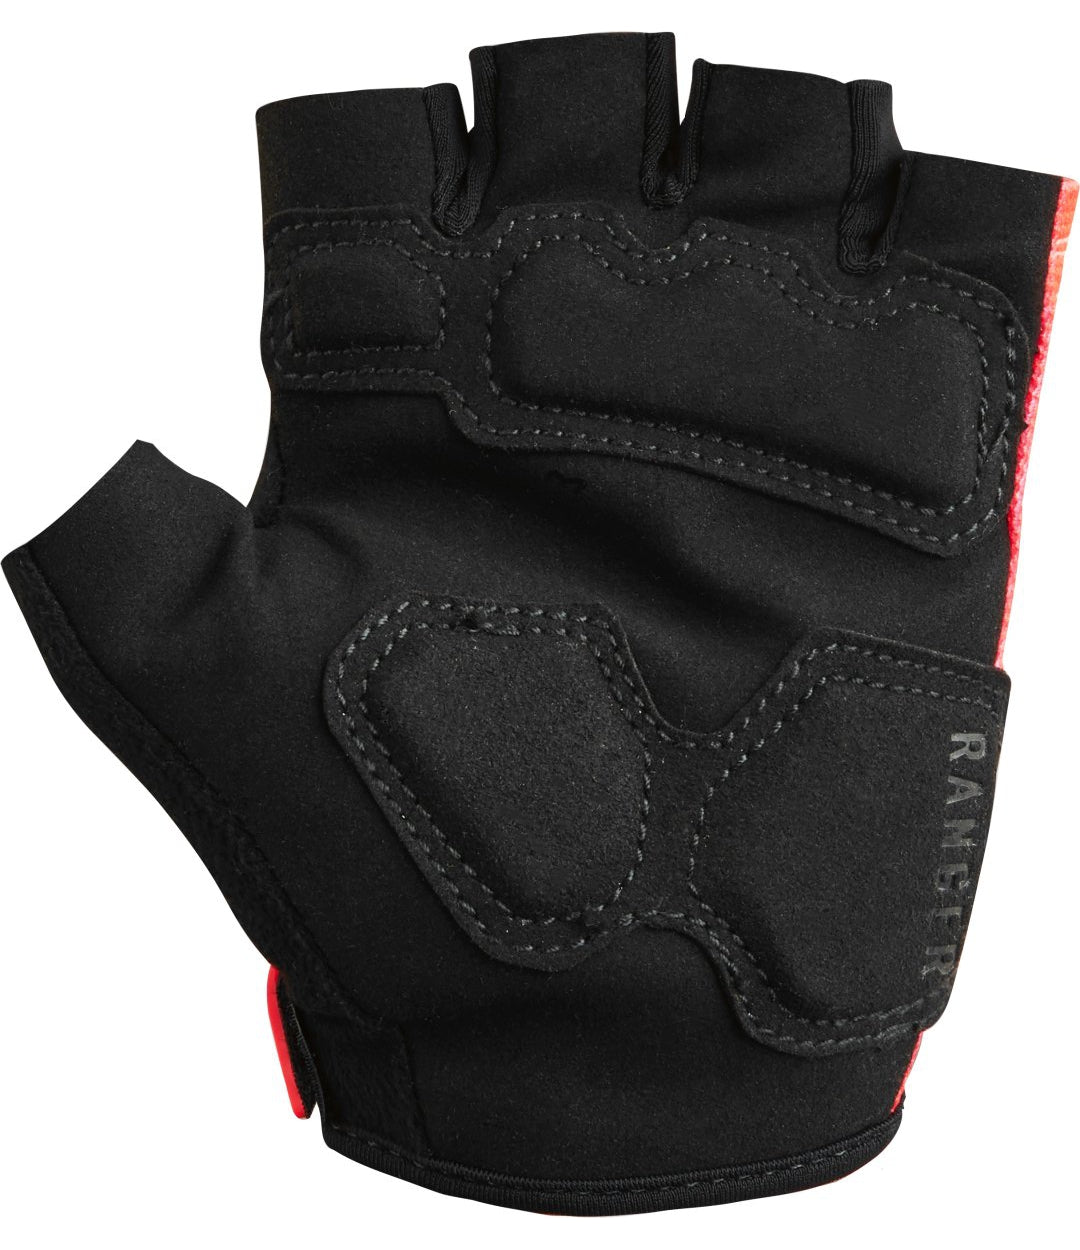 GUANTES MUJER RANGER GEL - FOX RACING COLOMBIA - FOX CONCEPT STORE - GUANTES MTB